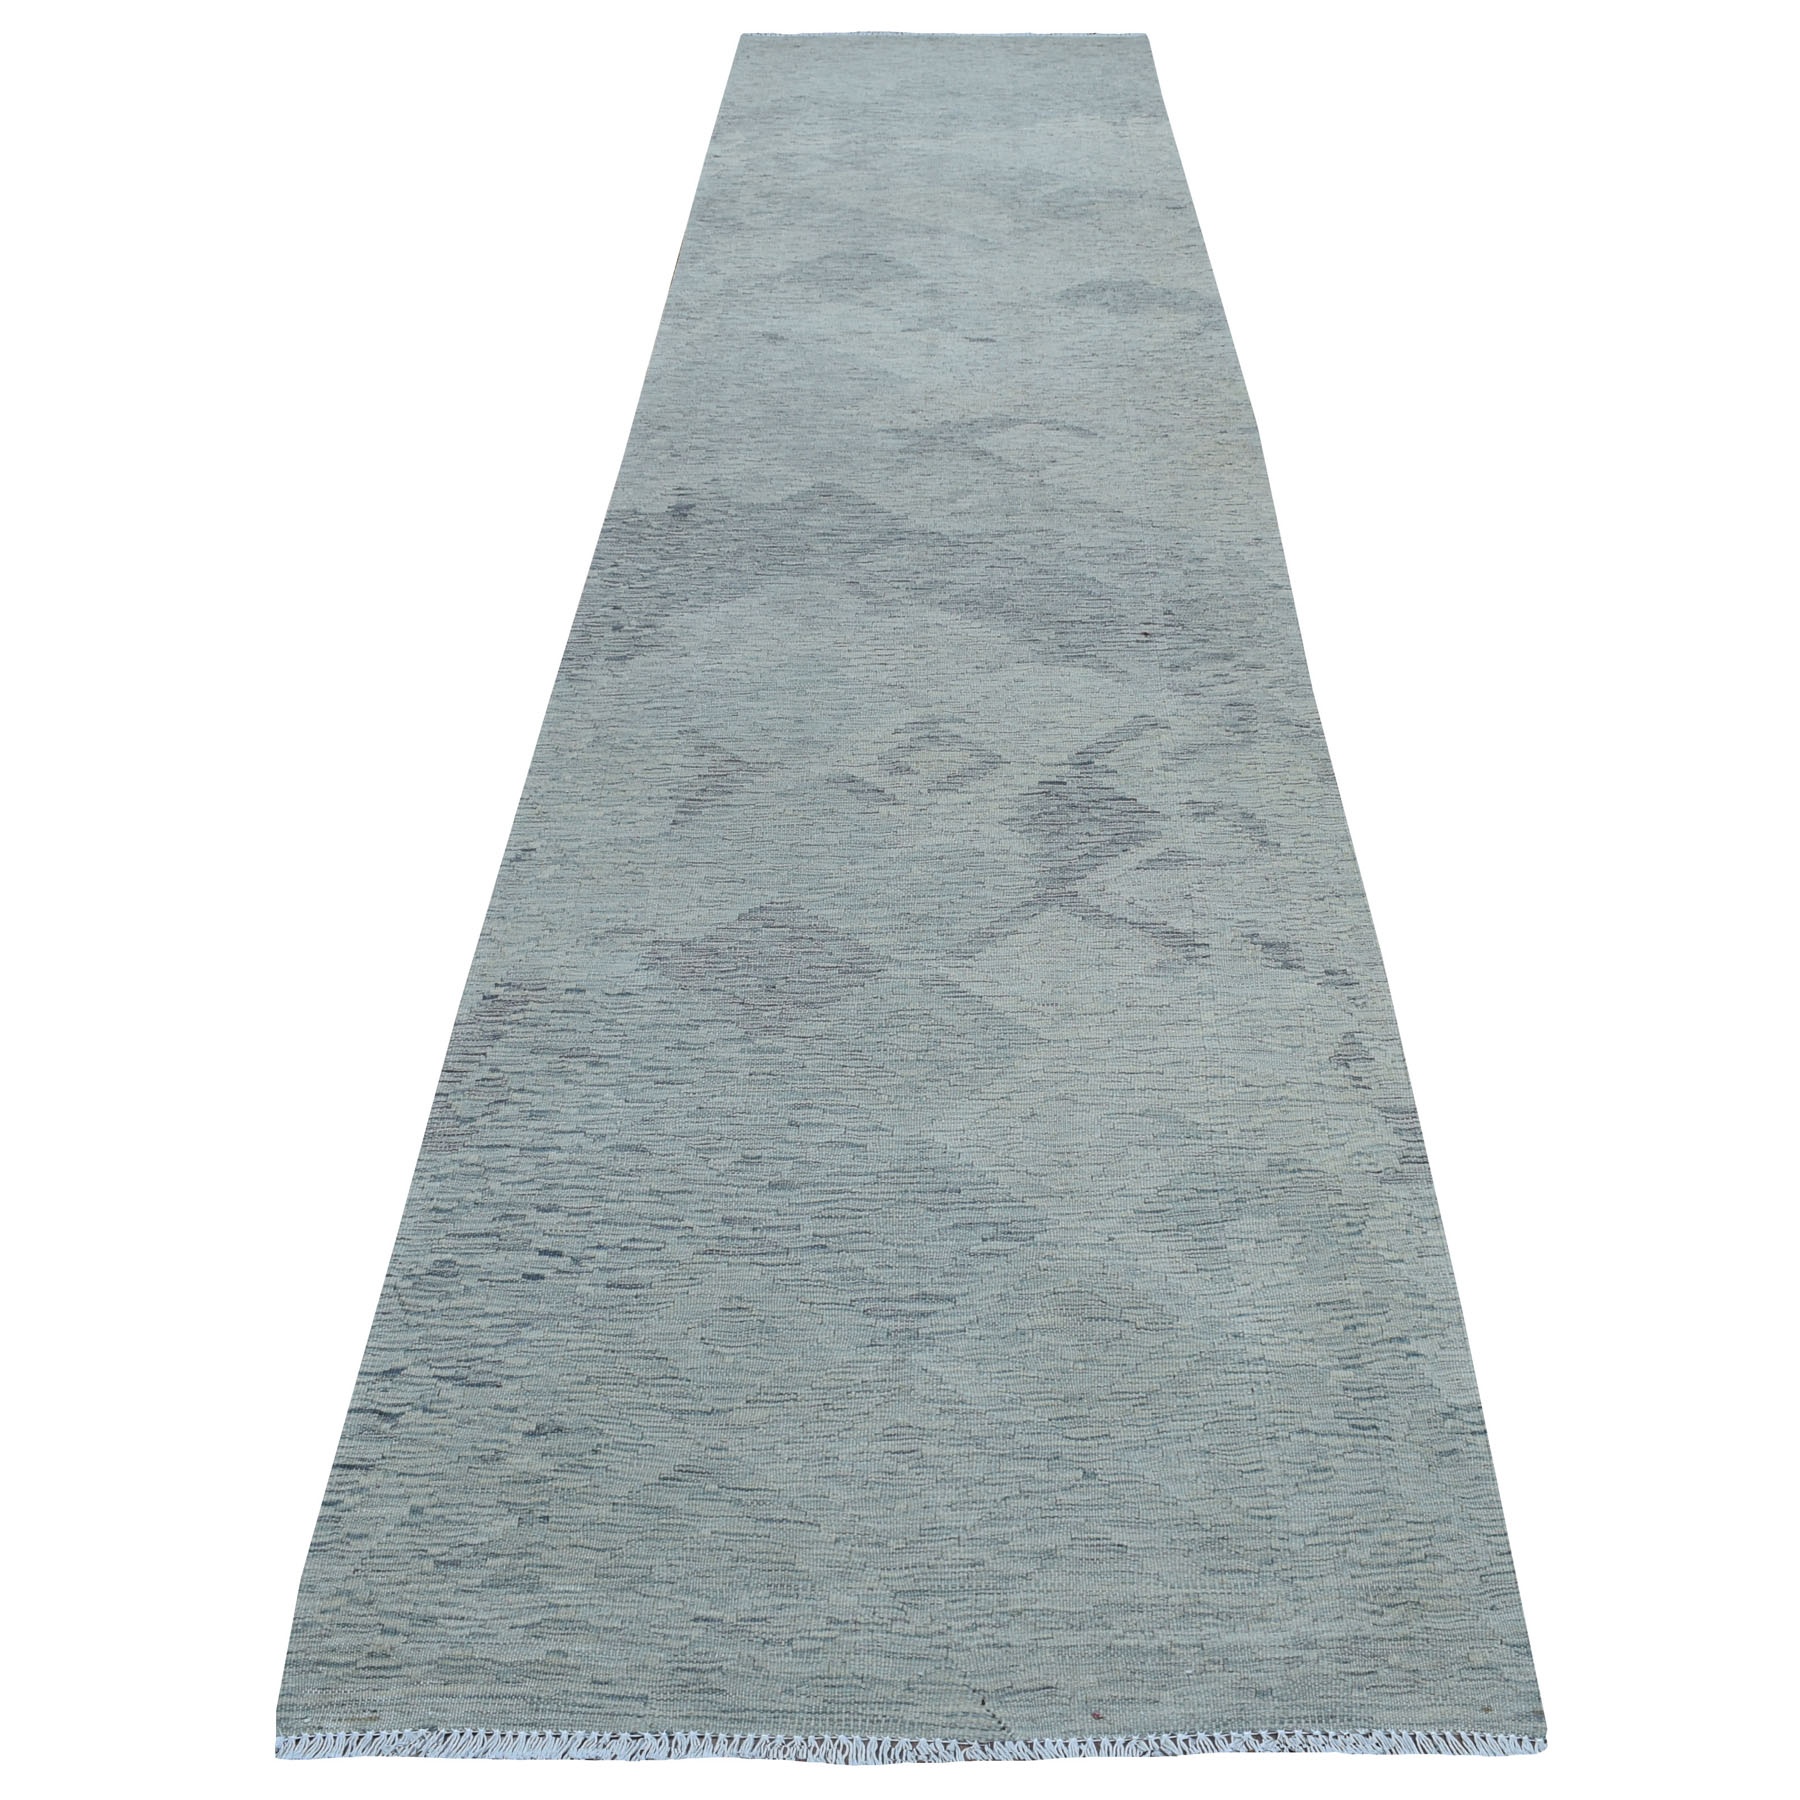 Modern & Contemporary Wool Hand-Woven Area Rug 3'1